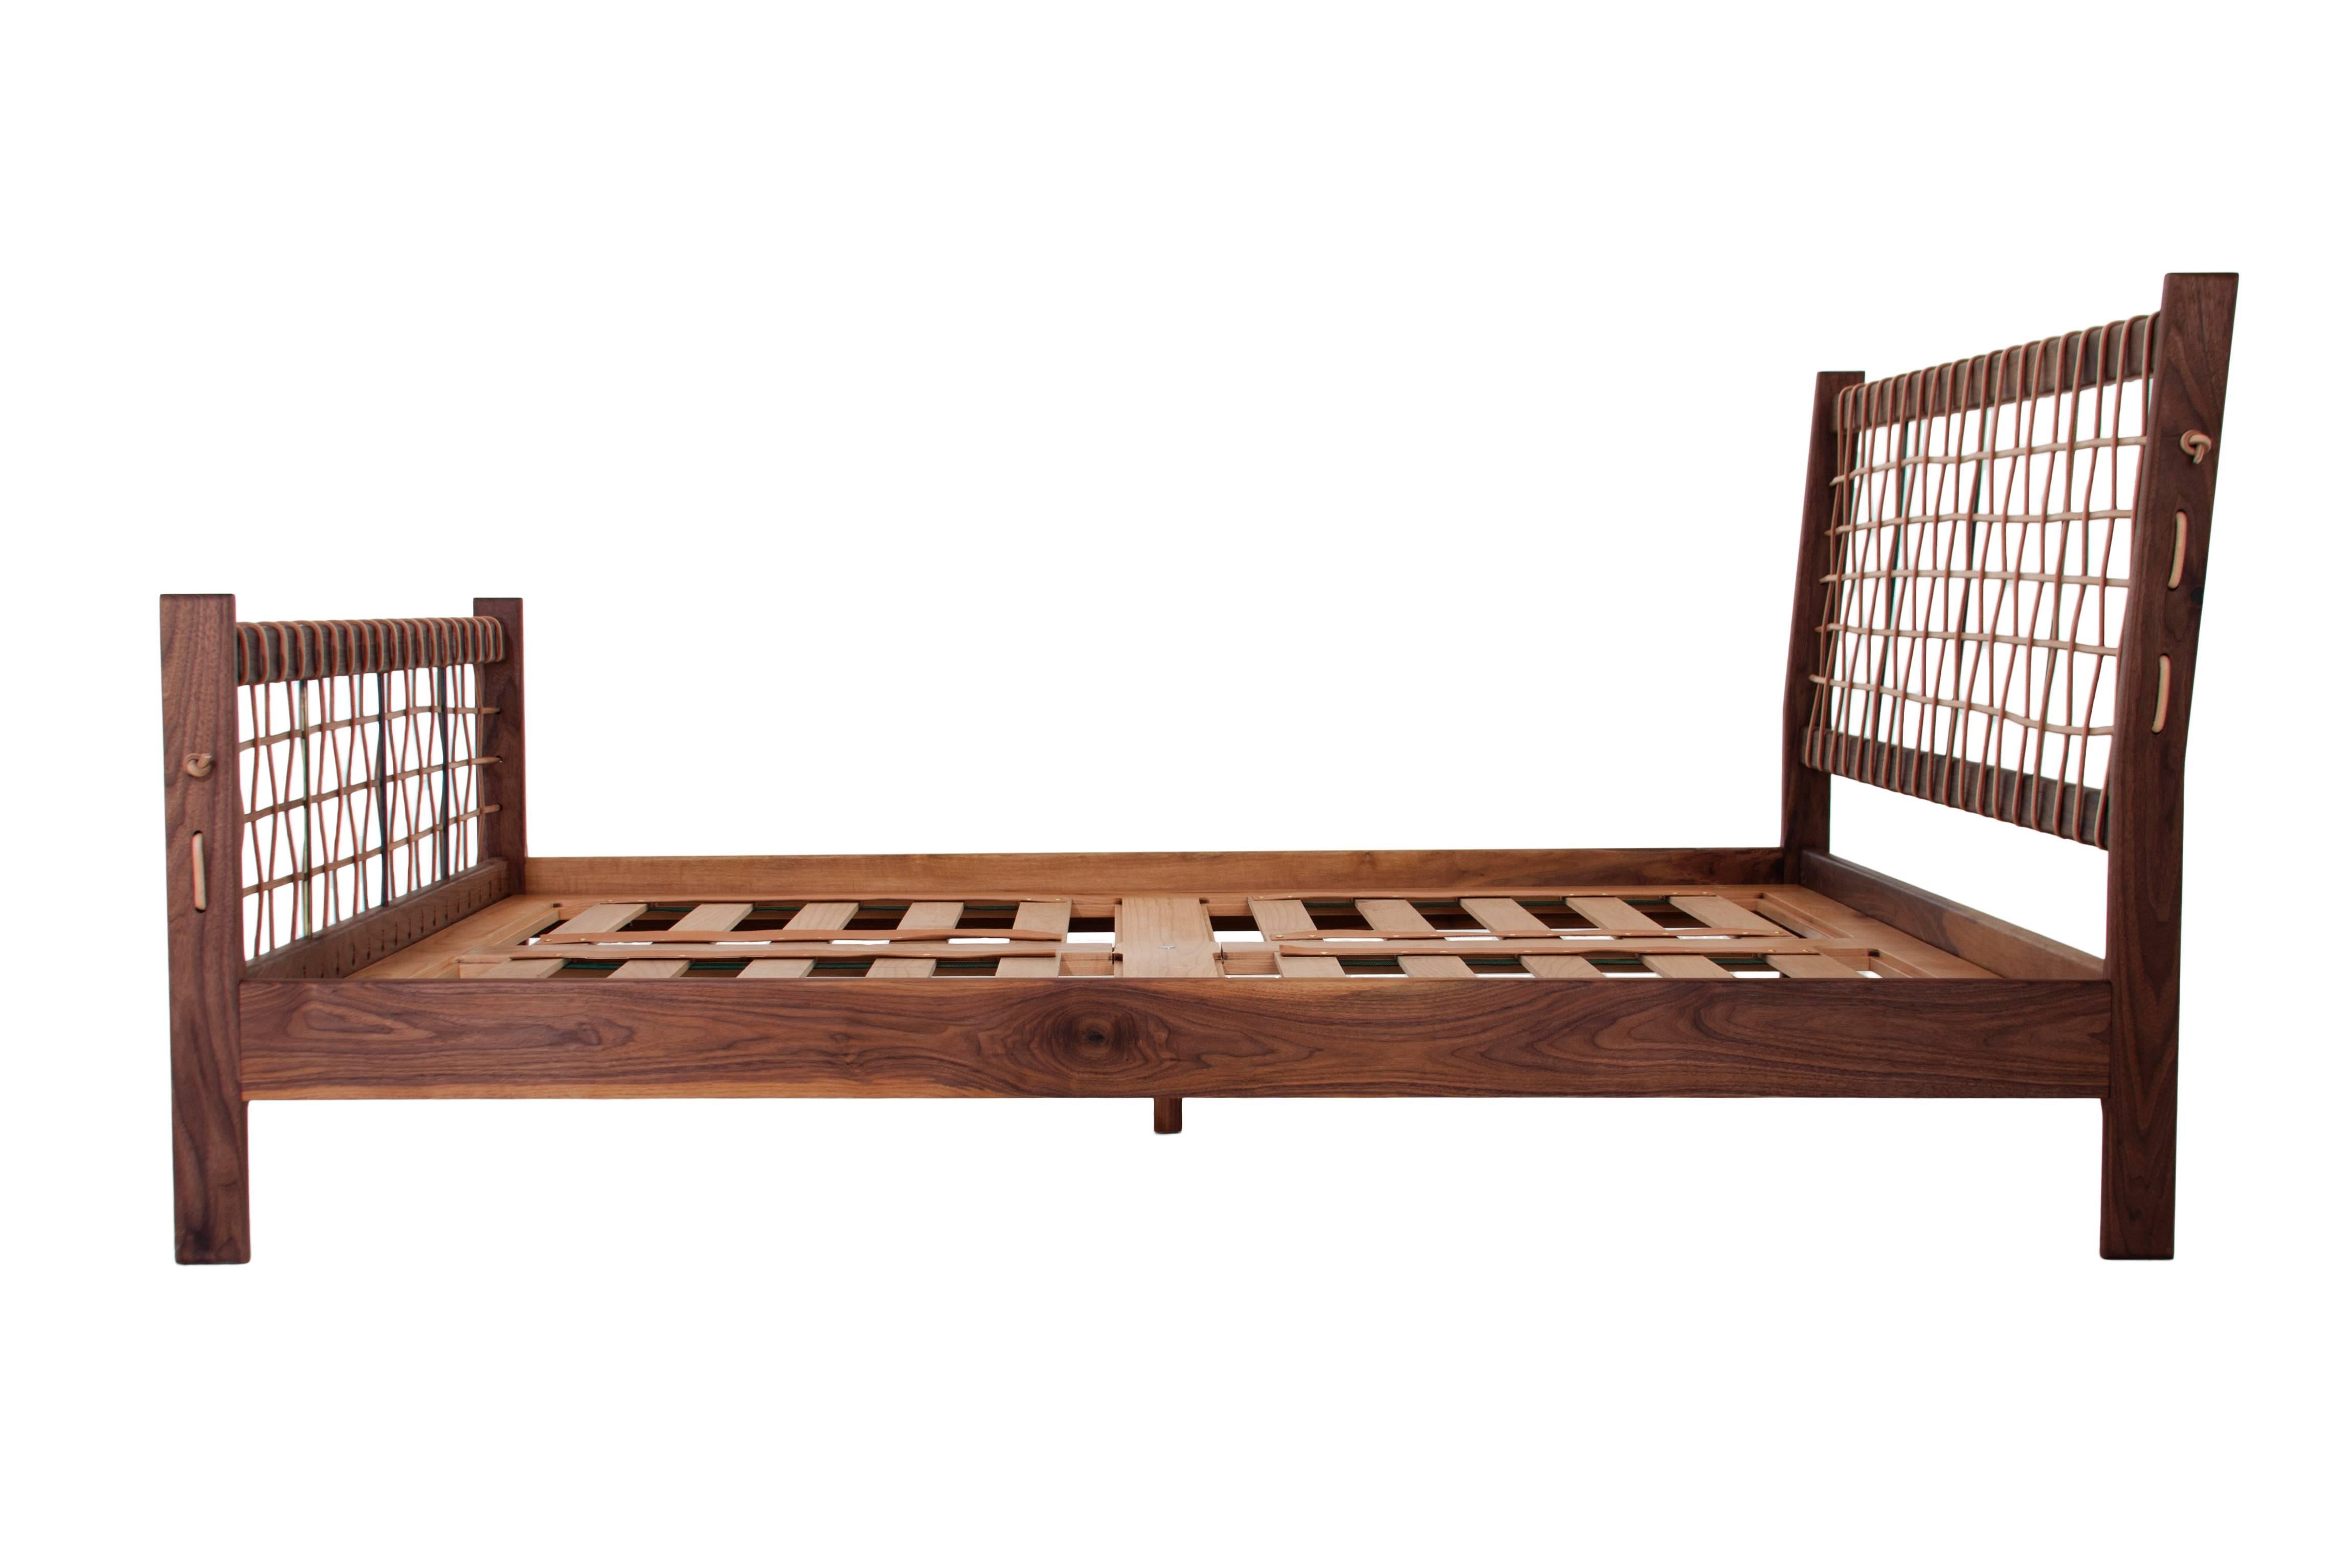 A custom figural walnut bed frame with a natural woven leather cord headboard and footboard. The frame has brass detailing and a stretched cord knot at each end. Avaliable in a variety of wood finishes, natural or black cord, steel or brass plugs.